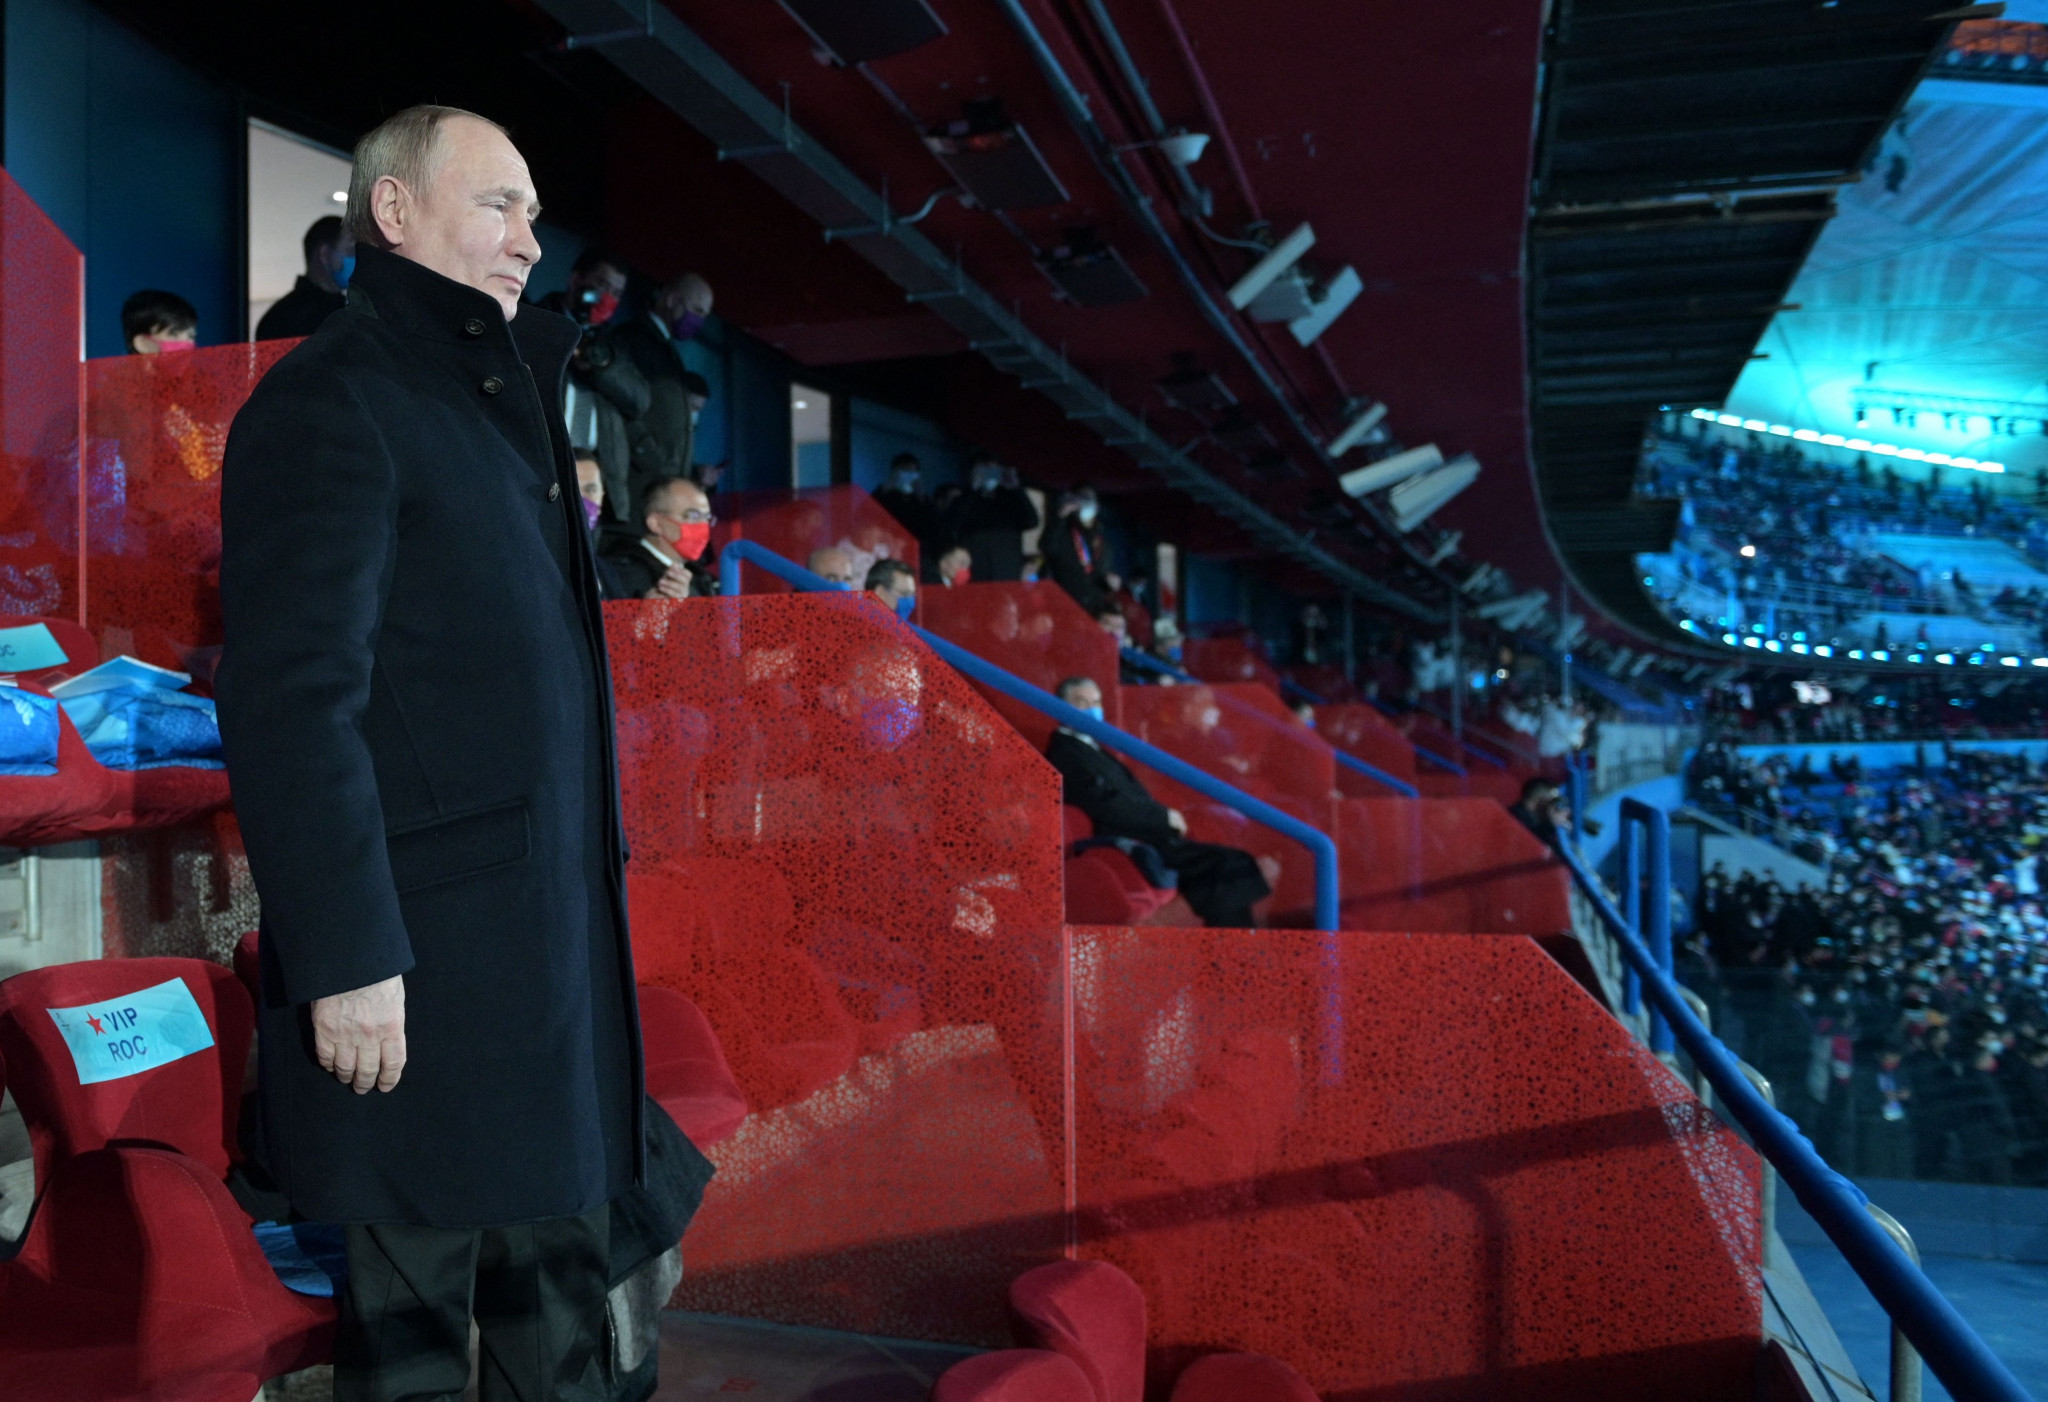 Russia's President Vladimir Putin was at the Beijing 2022 Winter Olympics in February, but has since had the Olympic Order withdrawn by the IOC ©Getty Images